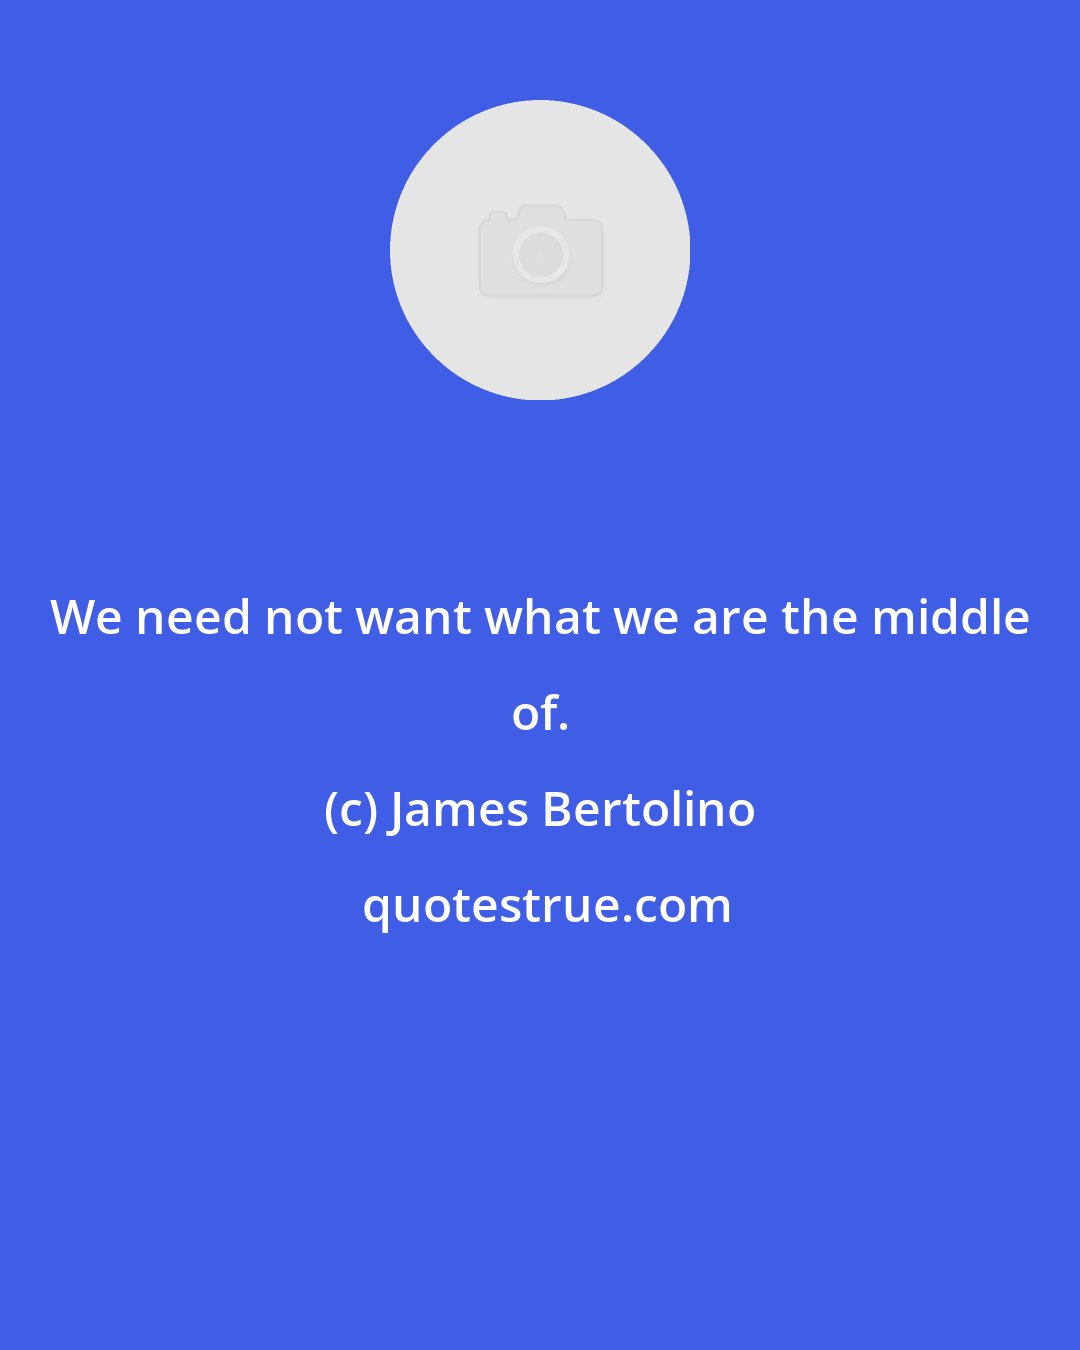 James Bertolino: We need not want what we are the middle of.